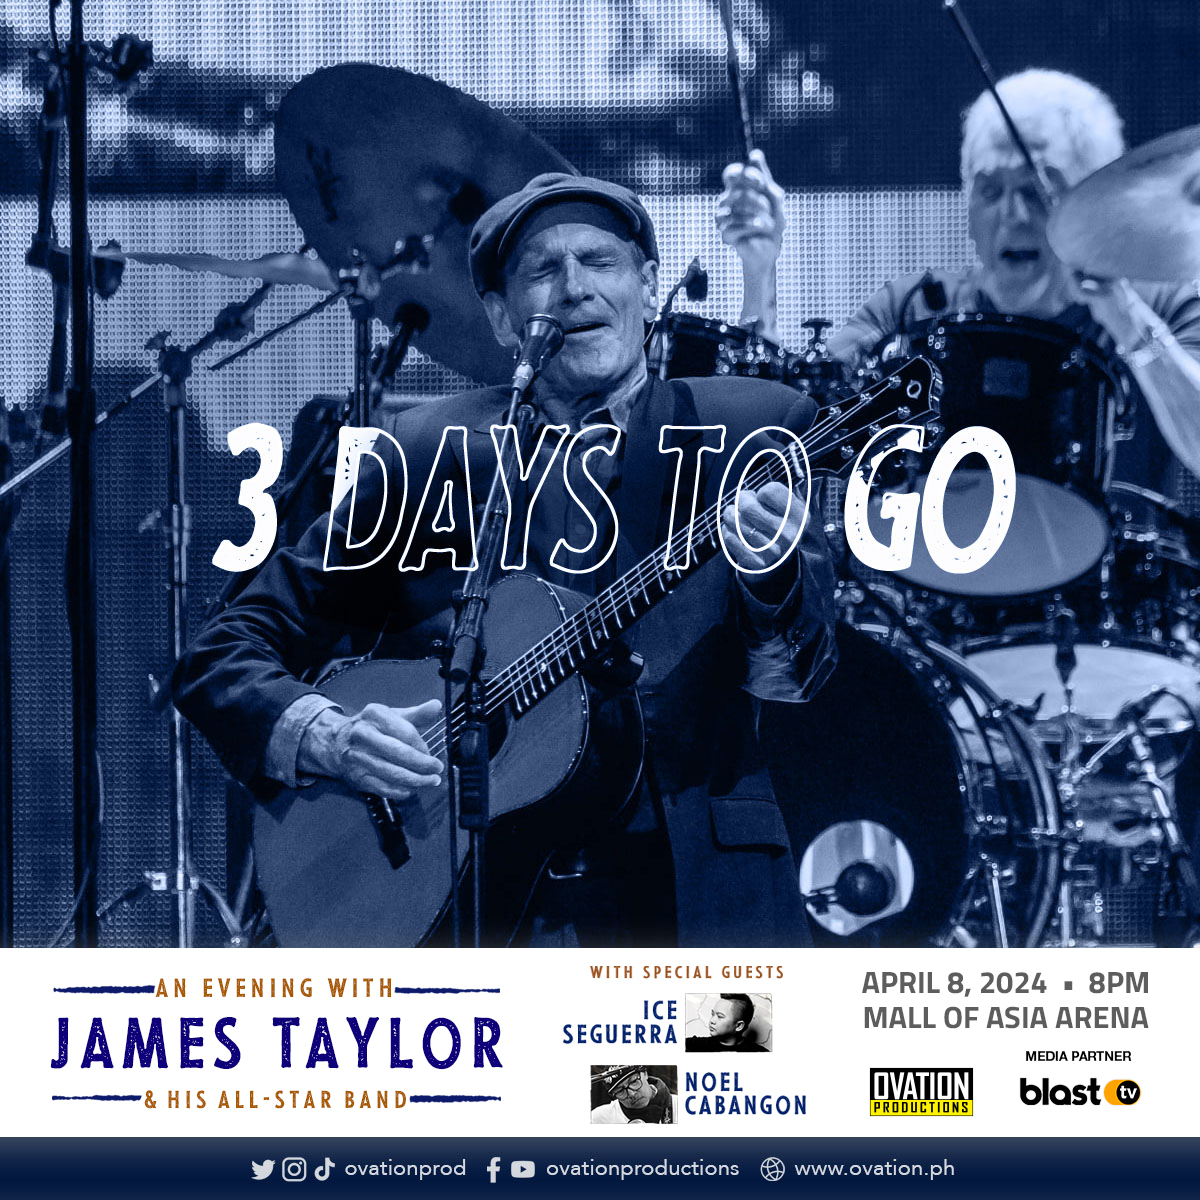 The wait is almost over! An Evening with James Taylor and his All-Star Band is happening in 3 days! Limited tickets are available at smtickets.com